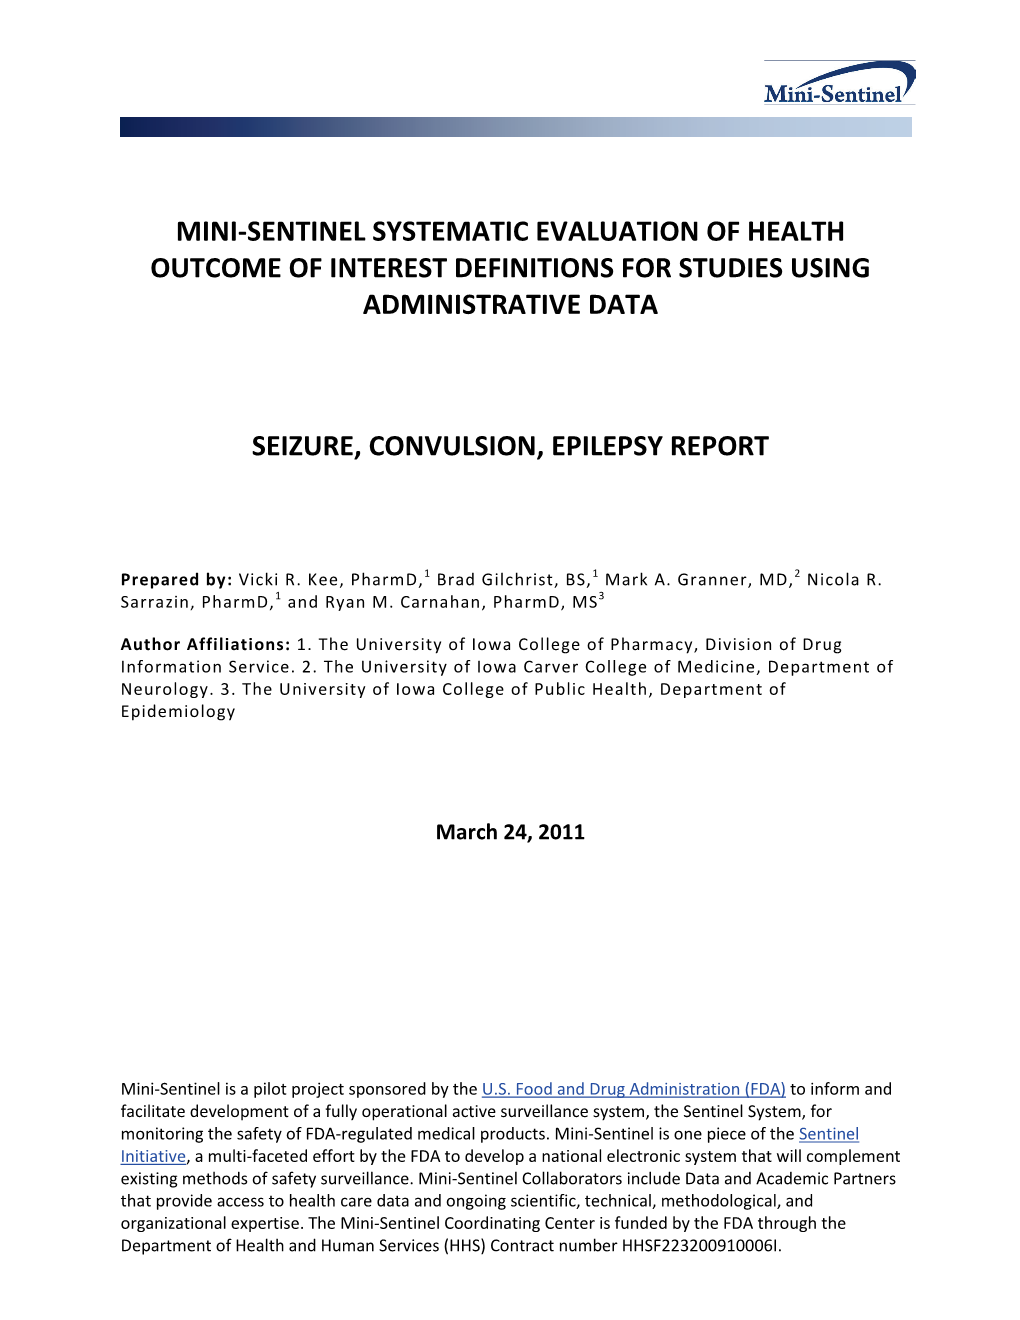 Mini-Sentinel Systematic Evaluation of Health Outcome of Interest Definitions for Studies Using Administrative Data